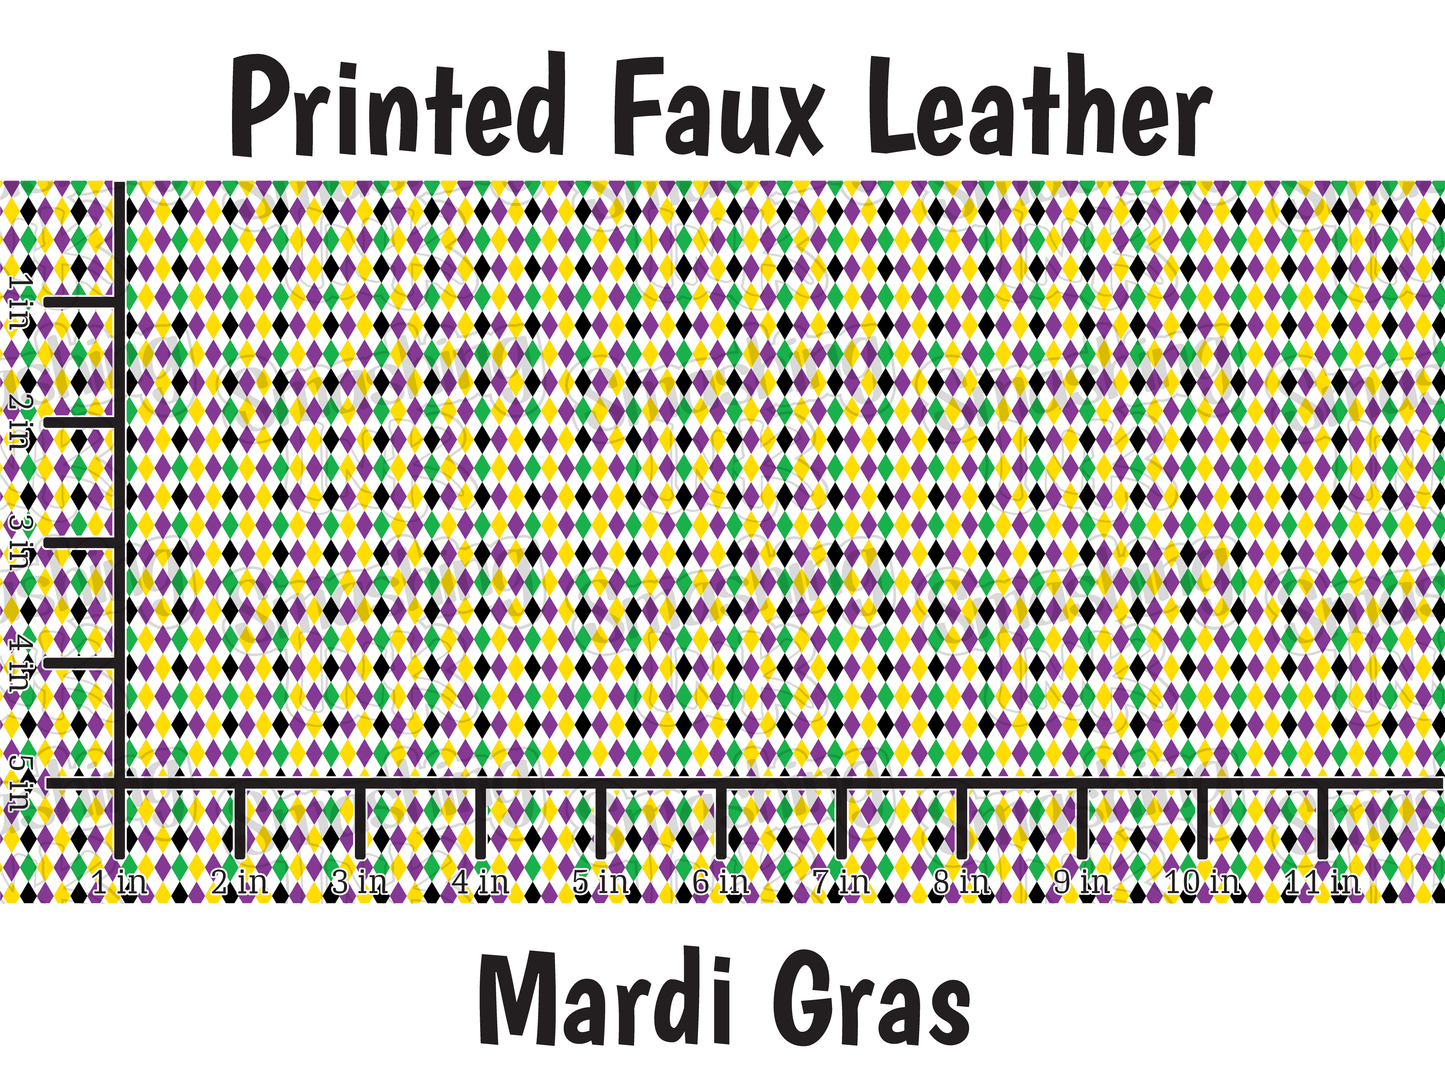 Mardi Gras - Faux Leather Sheet (SHIPS IN 3 BUS DAYS)